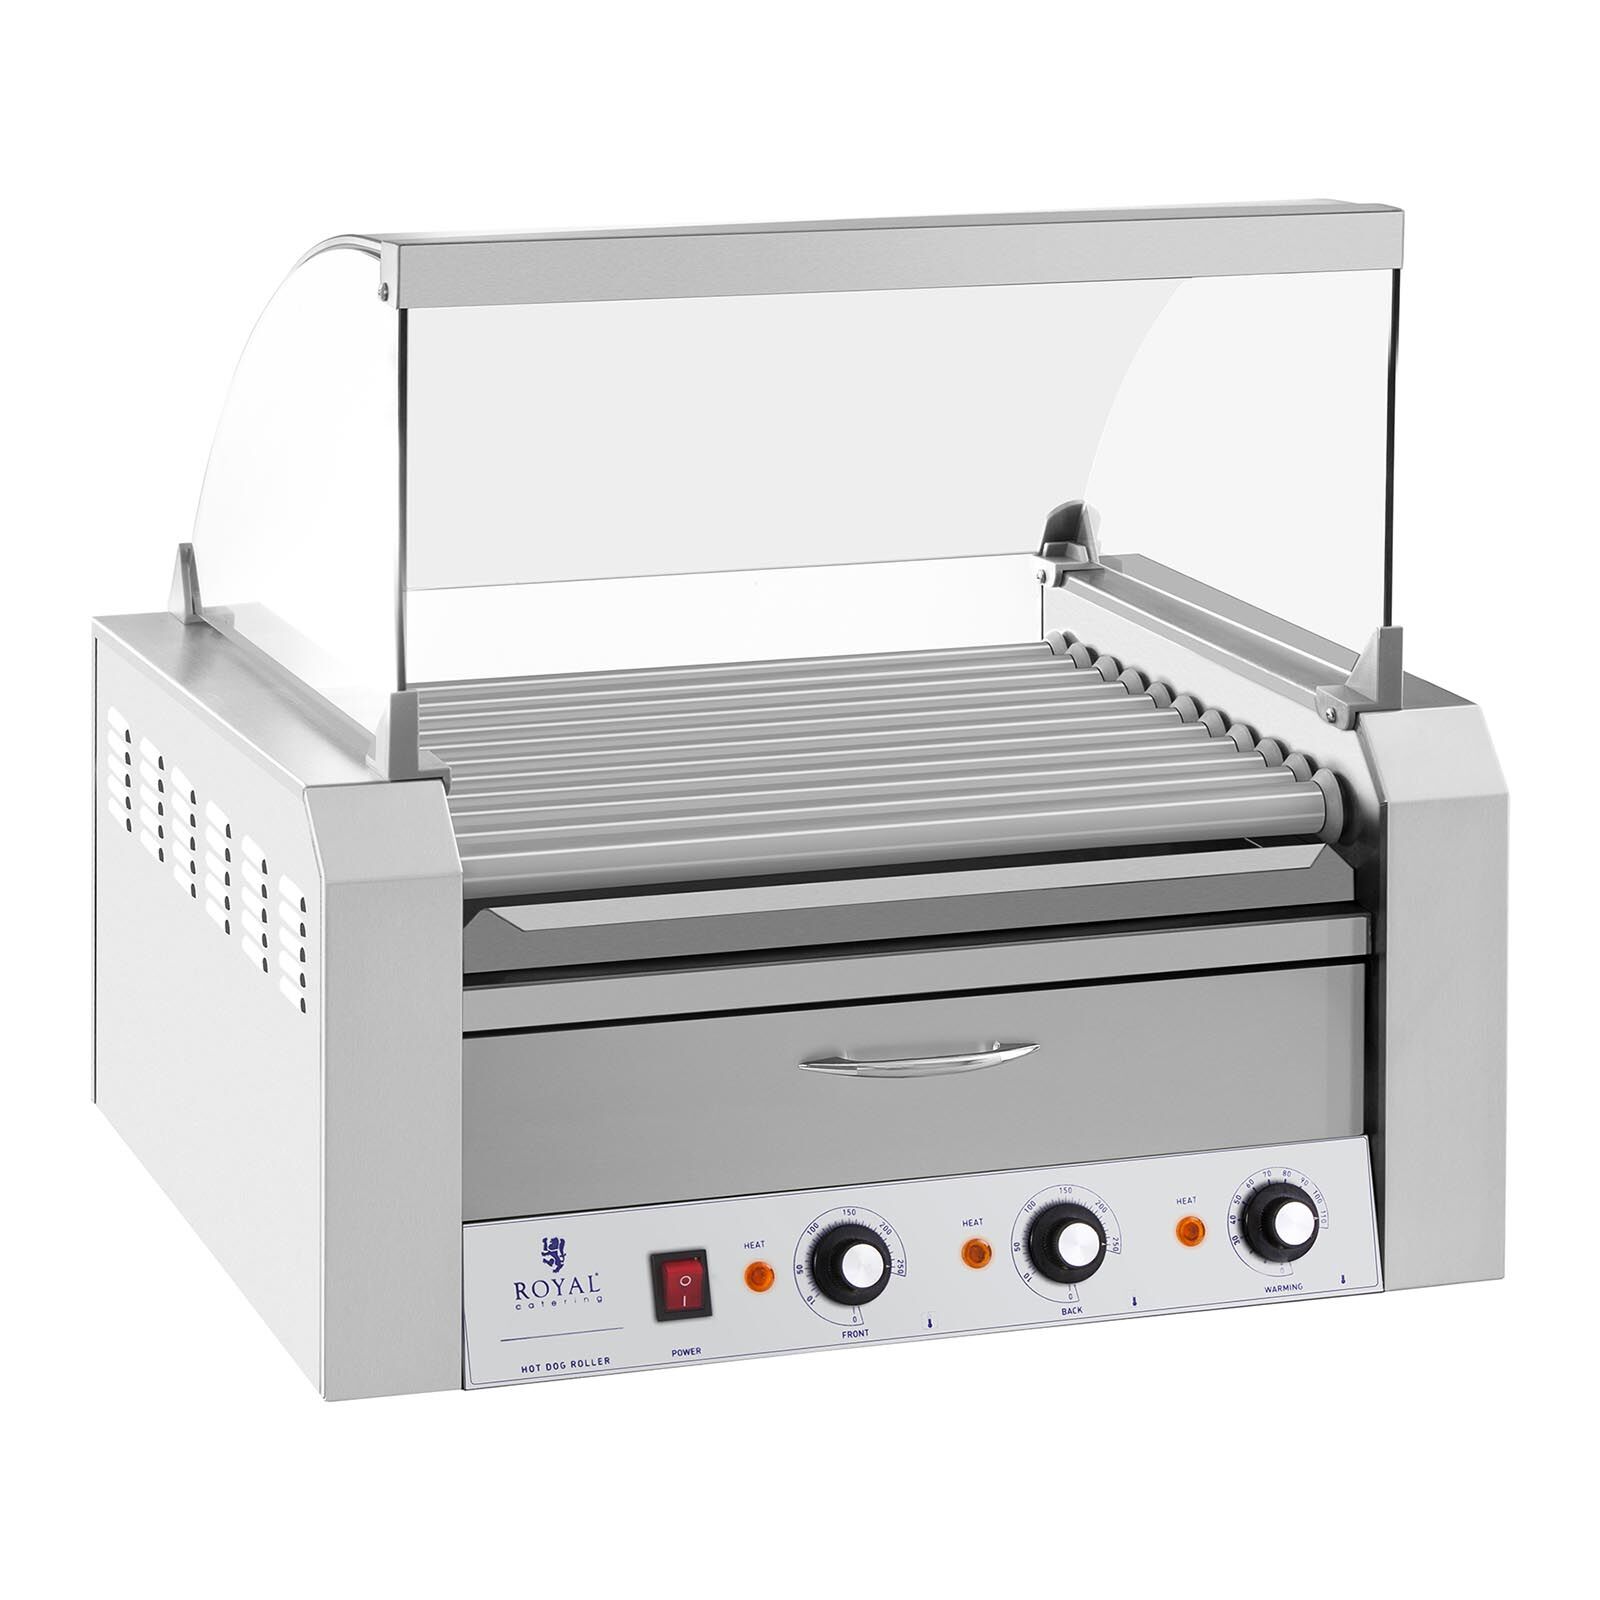 Royal Catering Hotdog Grill - 11 rollers - Warming drawers - Stainless steel RCHG-11WO